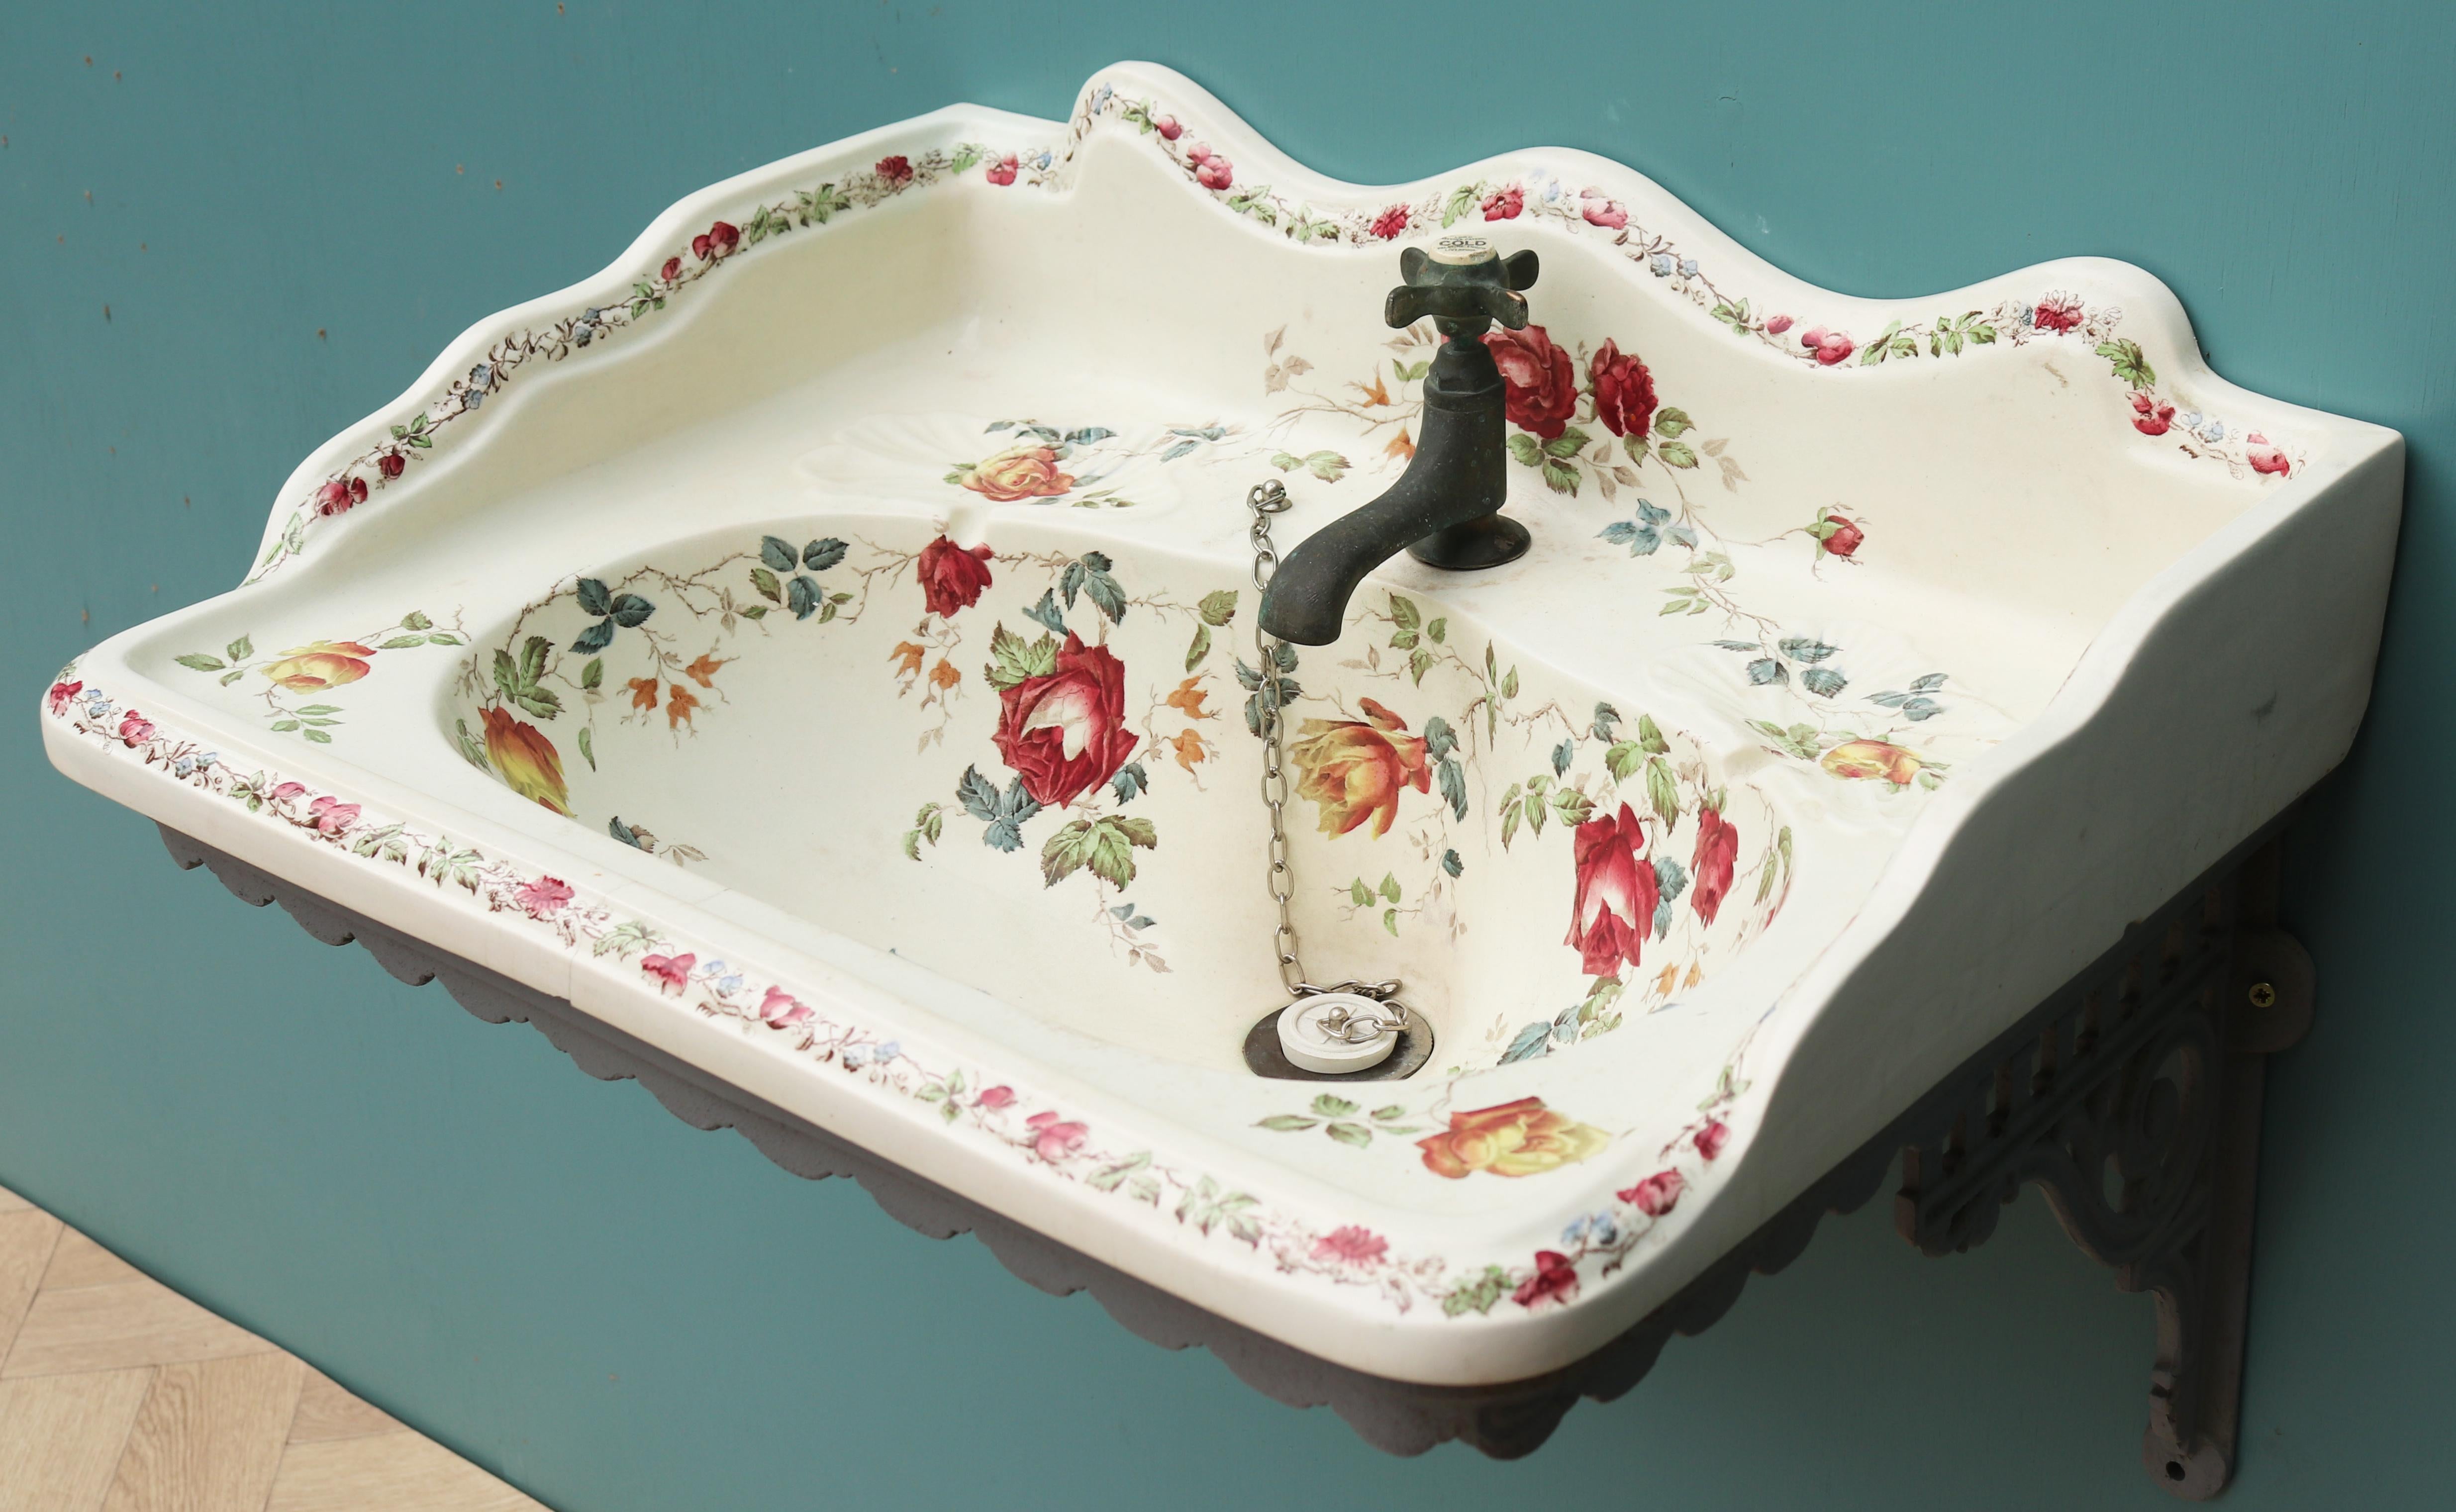 Antique English Transfer Printed Wash Basin In Fair Condition For Sale In Wormelow, Herefordshire